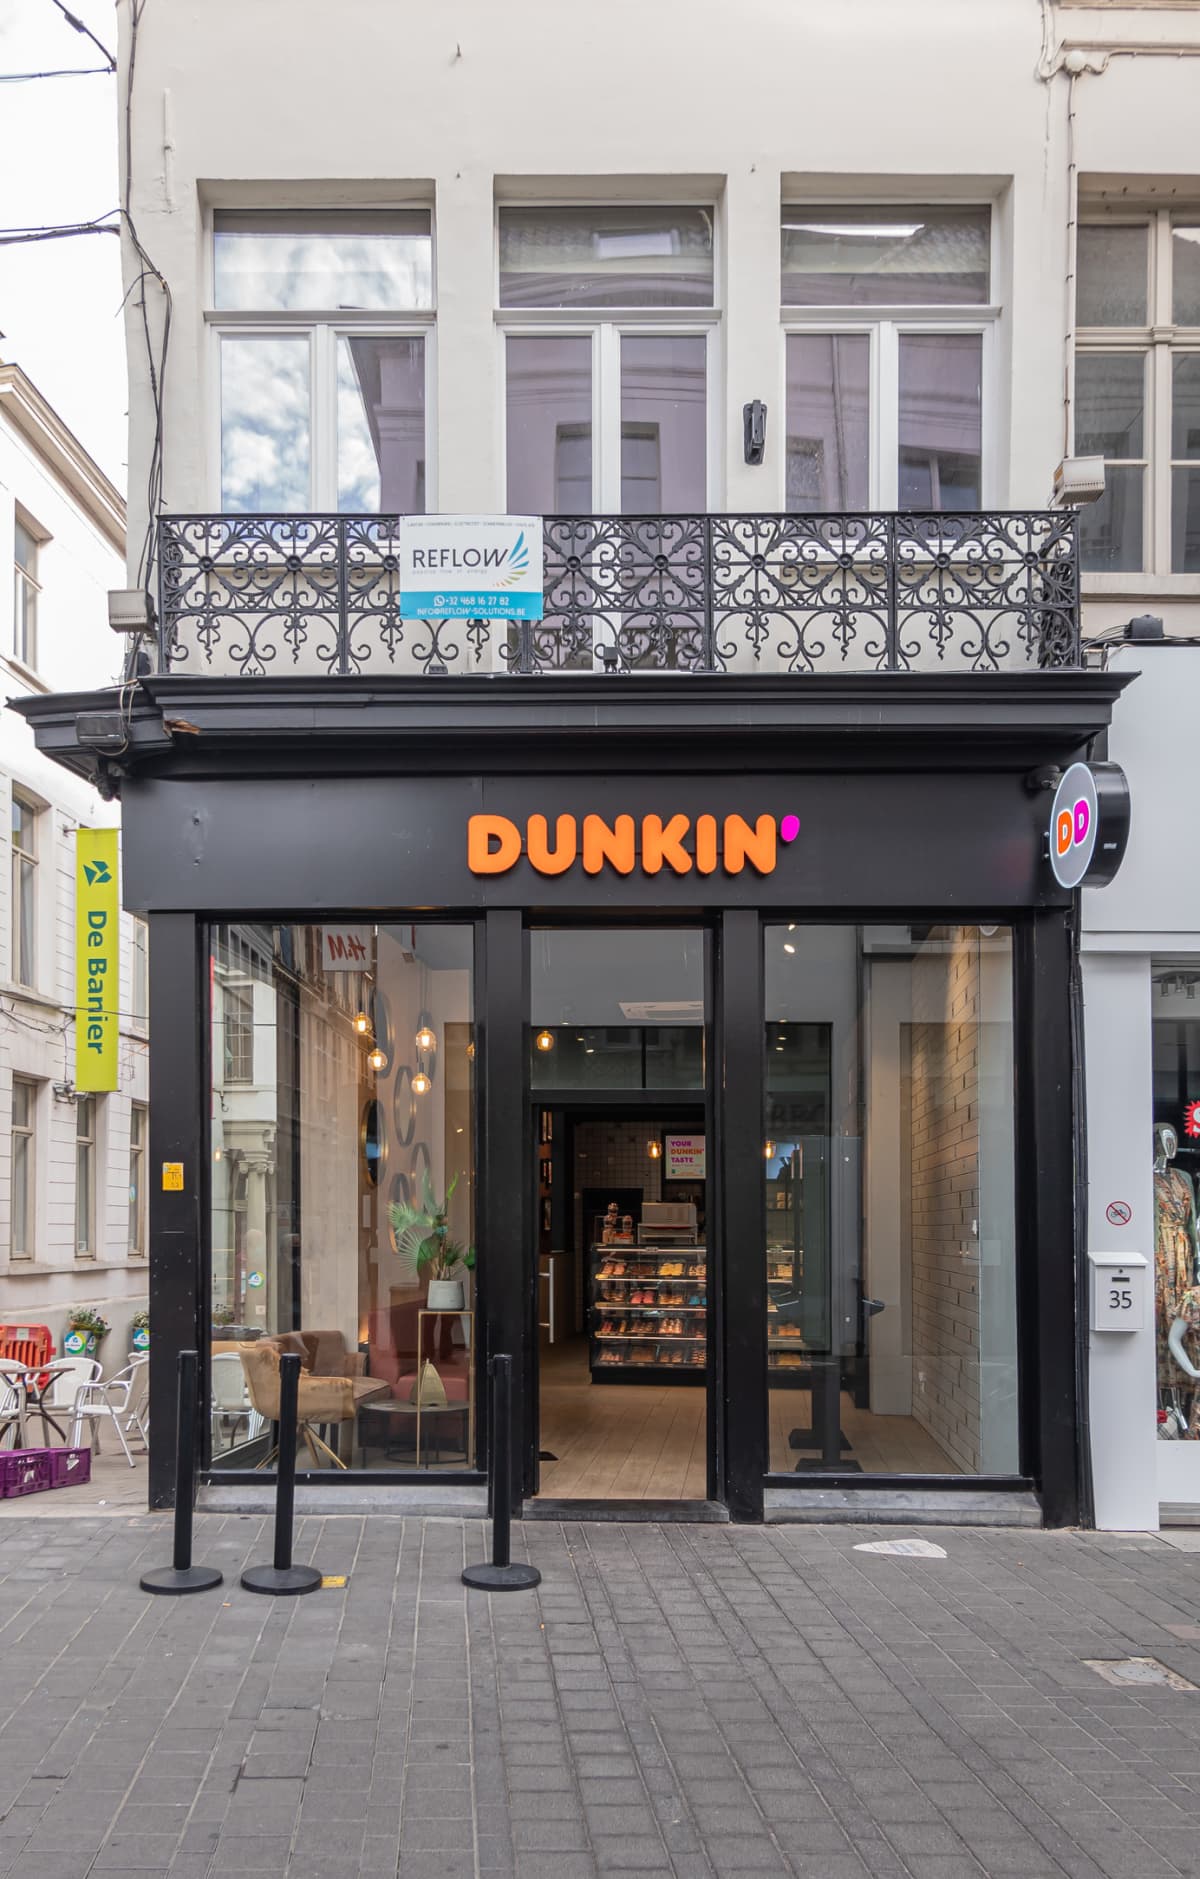 Gent, Flanders, Belgium - July 30, 2021: Dunkin Donuts store black and window facade on corner showing display inside and advertising as DD.